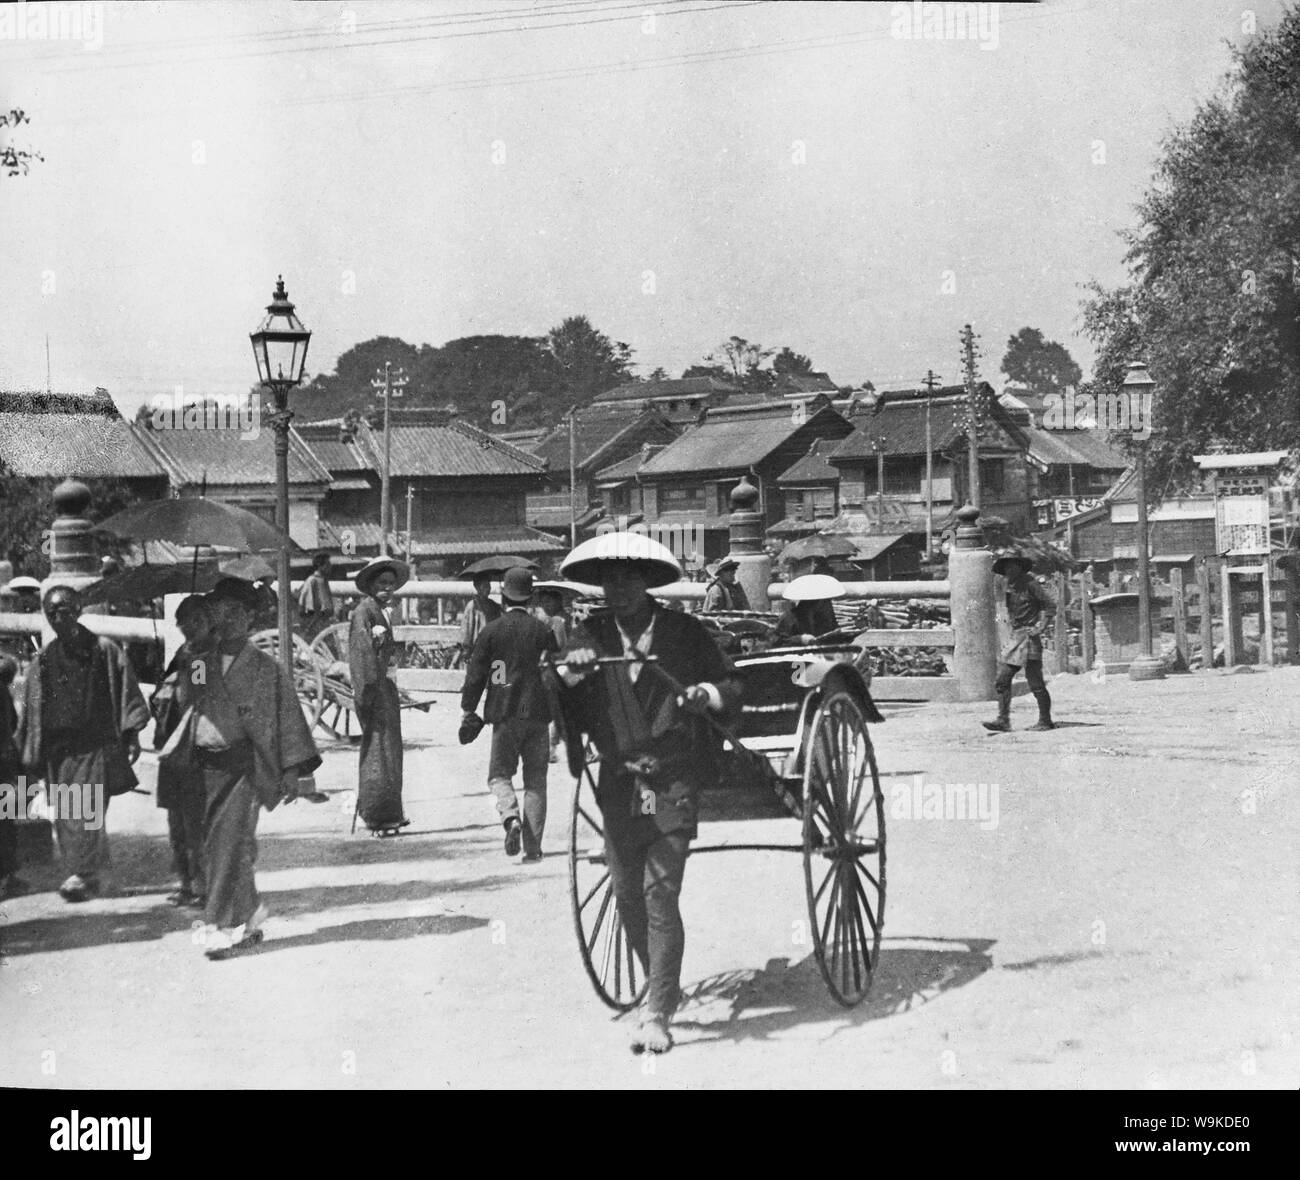 [ 1890s Japan - Japanese Rickshaw ] —   Rickshaw near bridge in an urban Japanese landscape.  From a series of glass slides published (but not photographed) by Scottish photographer George Washington Wilson (1823–1893). Wilson's firm was one of the largest publishers of photographic prints in the world.  19th century vintage glass slide. Stock Photo